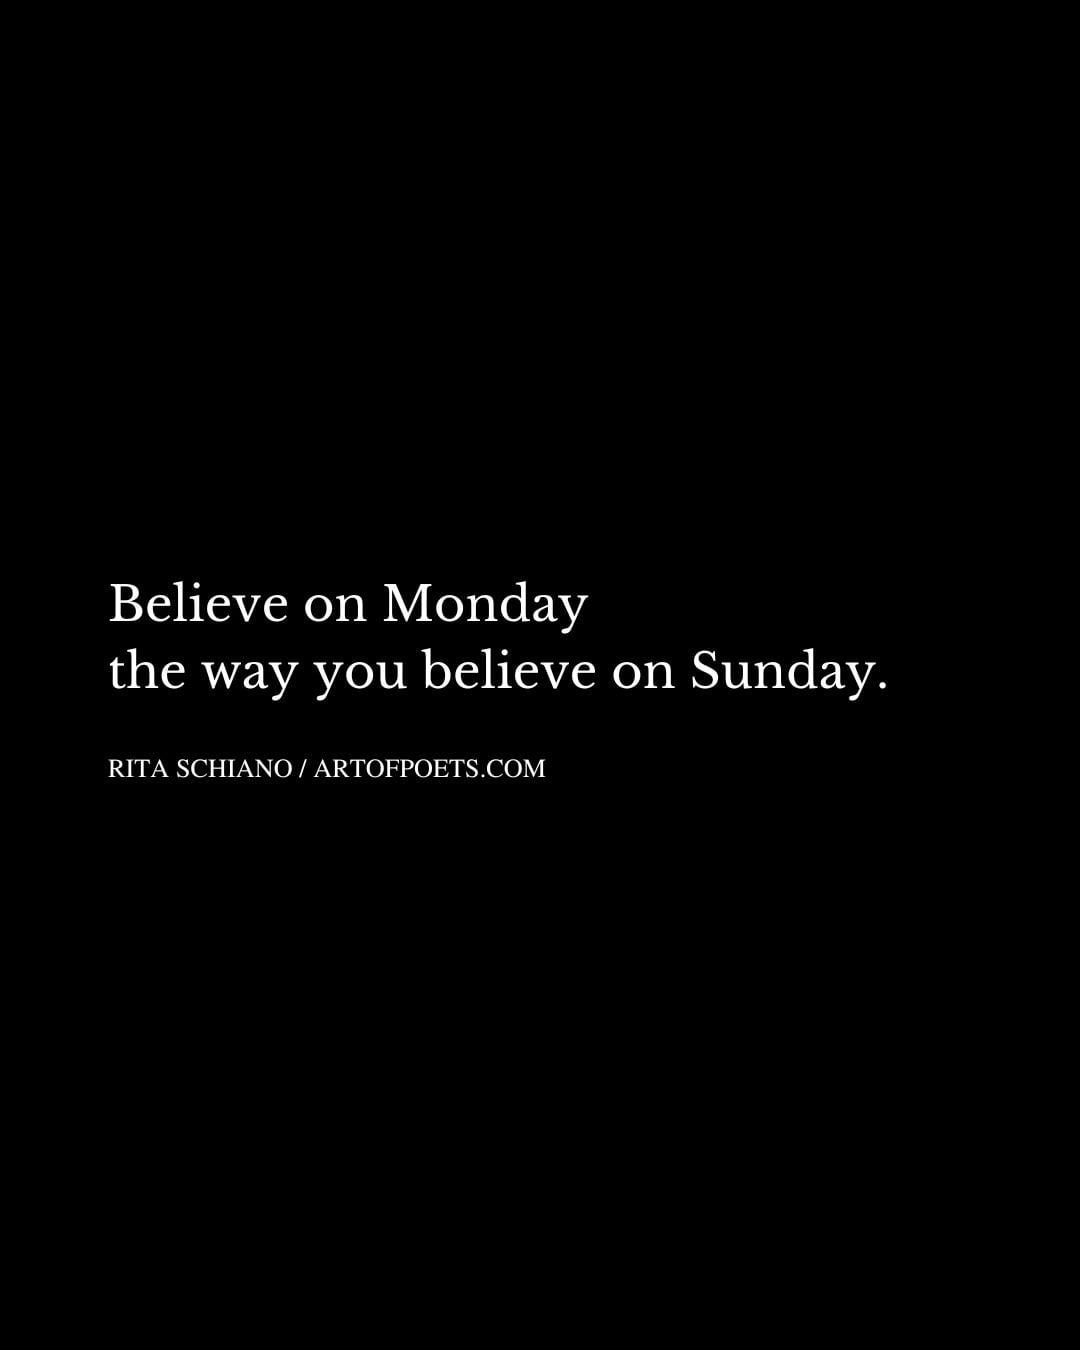 Believe on Monday the way you believe on Sunday